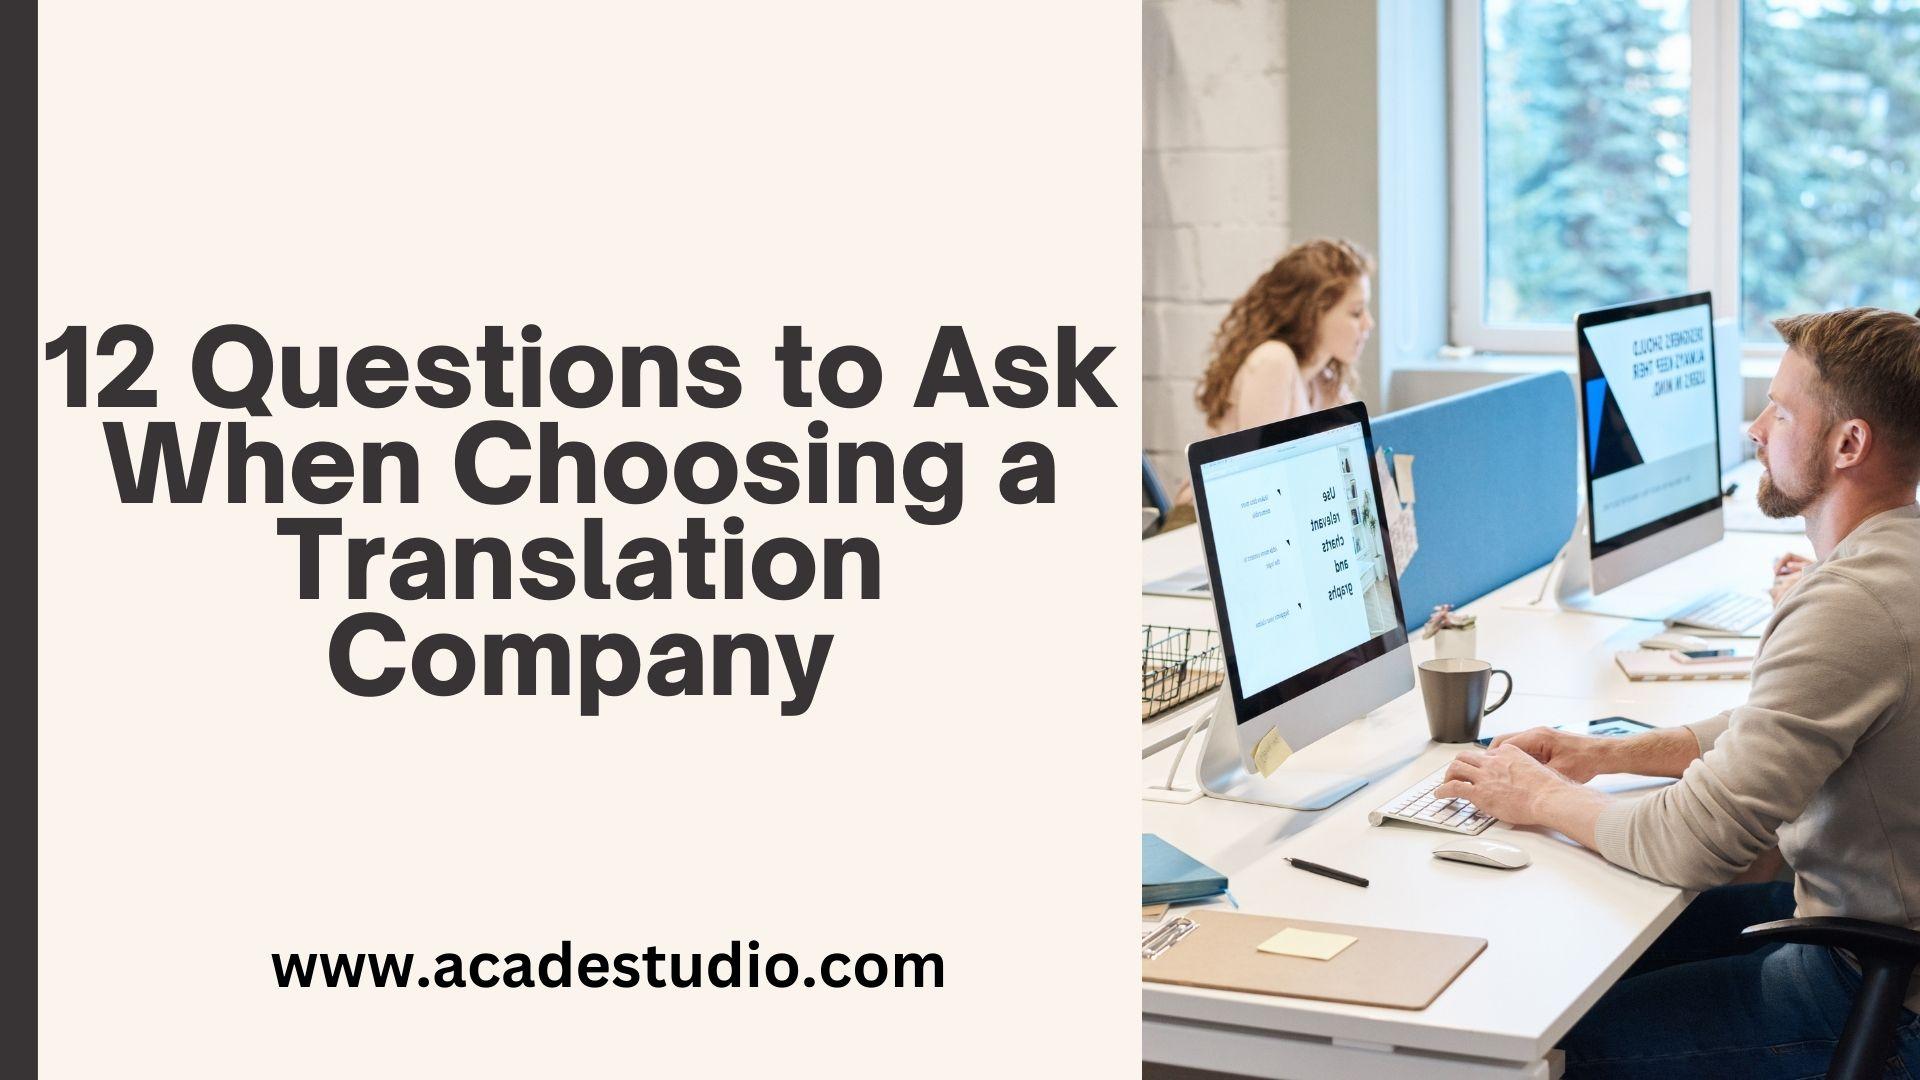 12 questions to ask when choosing a translation company